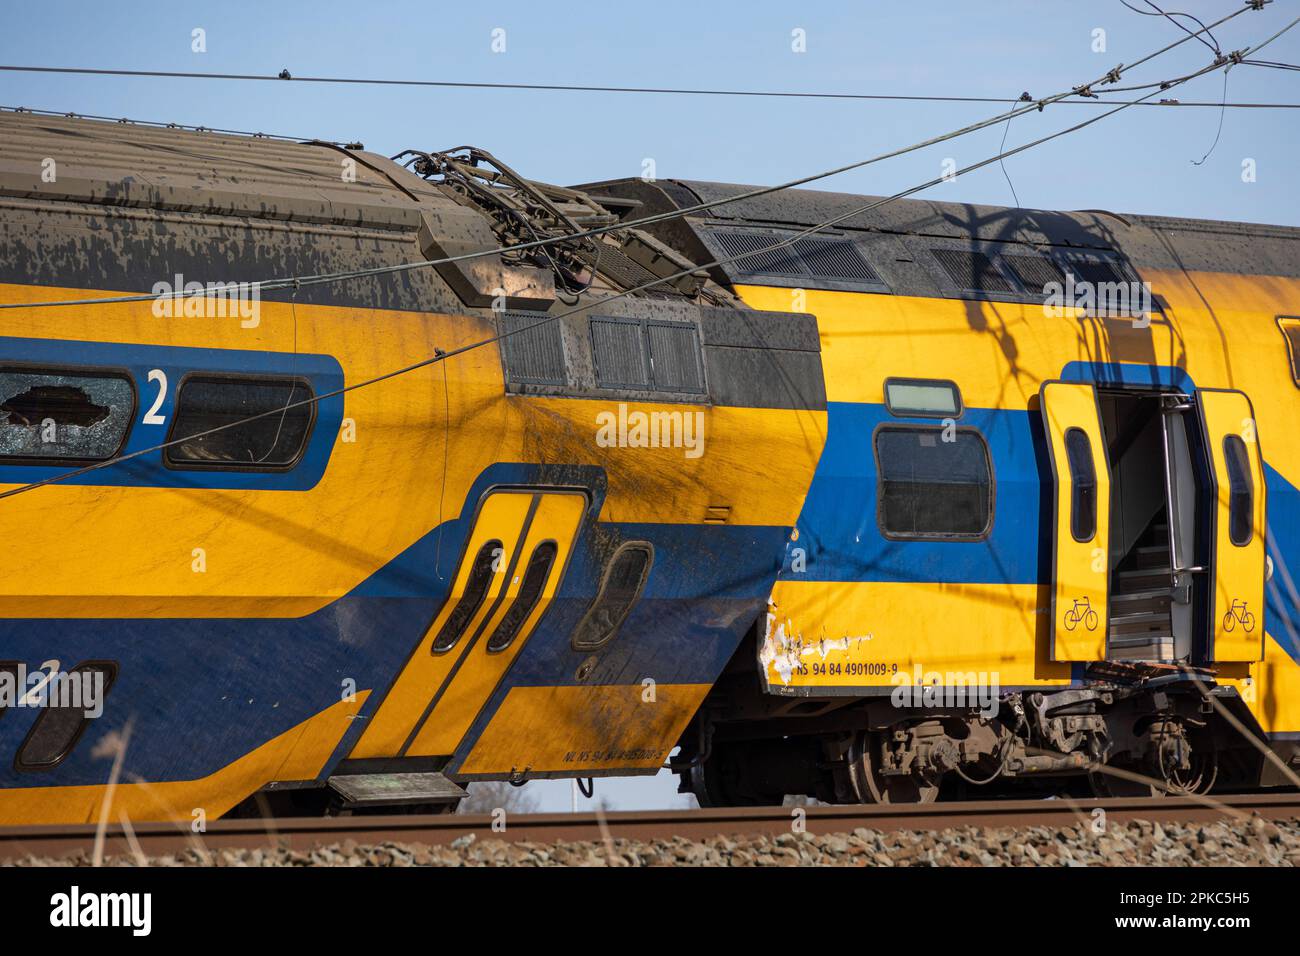 Voorschoten, Netherlands. 04th Apr, 2023. A view of a damaged carriage. A train collided with heavy construction equipment and derailment of the carriages near Leiden and the Hague. The Dutch railway crash resulted deadly, killing one person and injuring 30. Emergency services workers and police were on the scene to assess the damage. The accident took place in Voorschoten in the Netherlands. Credit: SOPA Images Limited/Alamy Live News Stock Photo